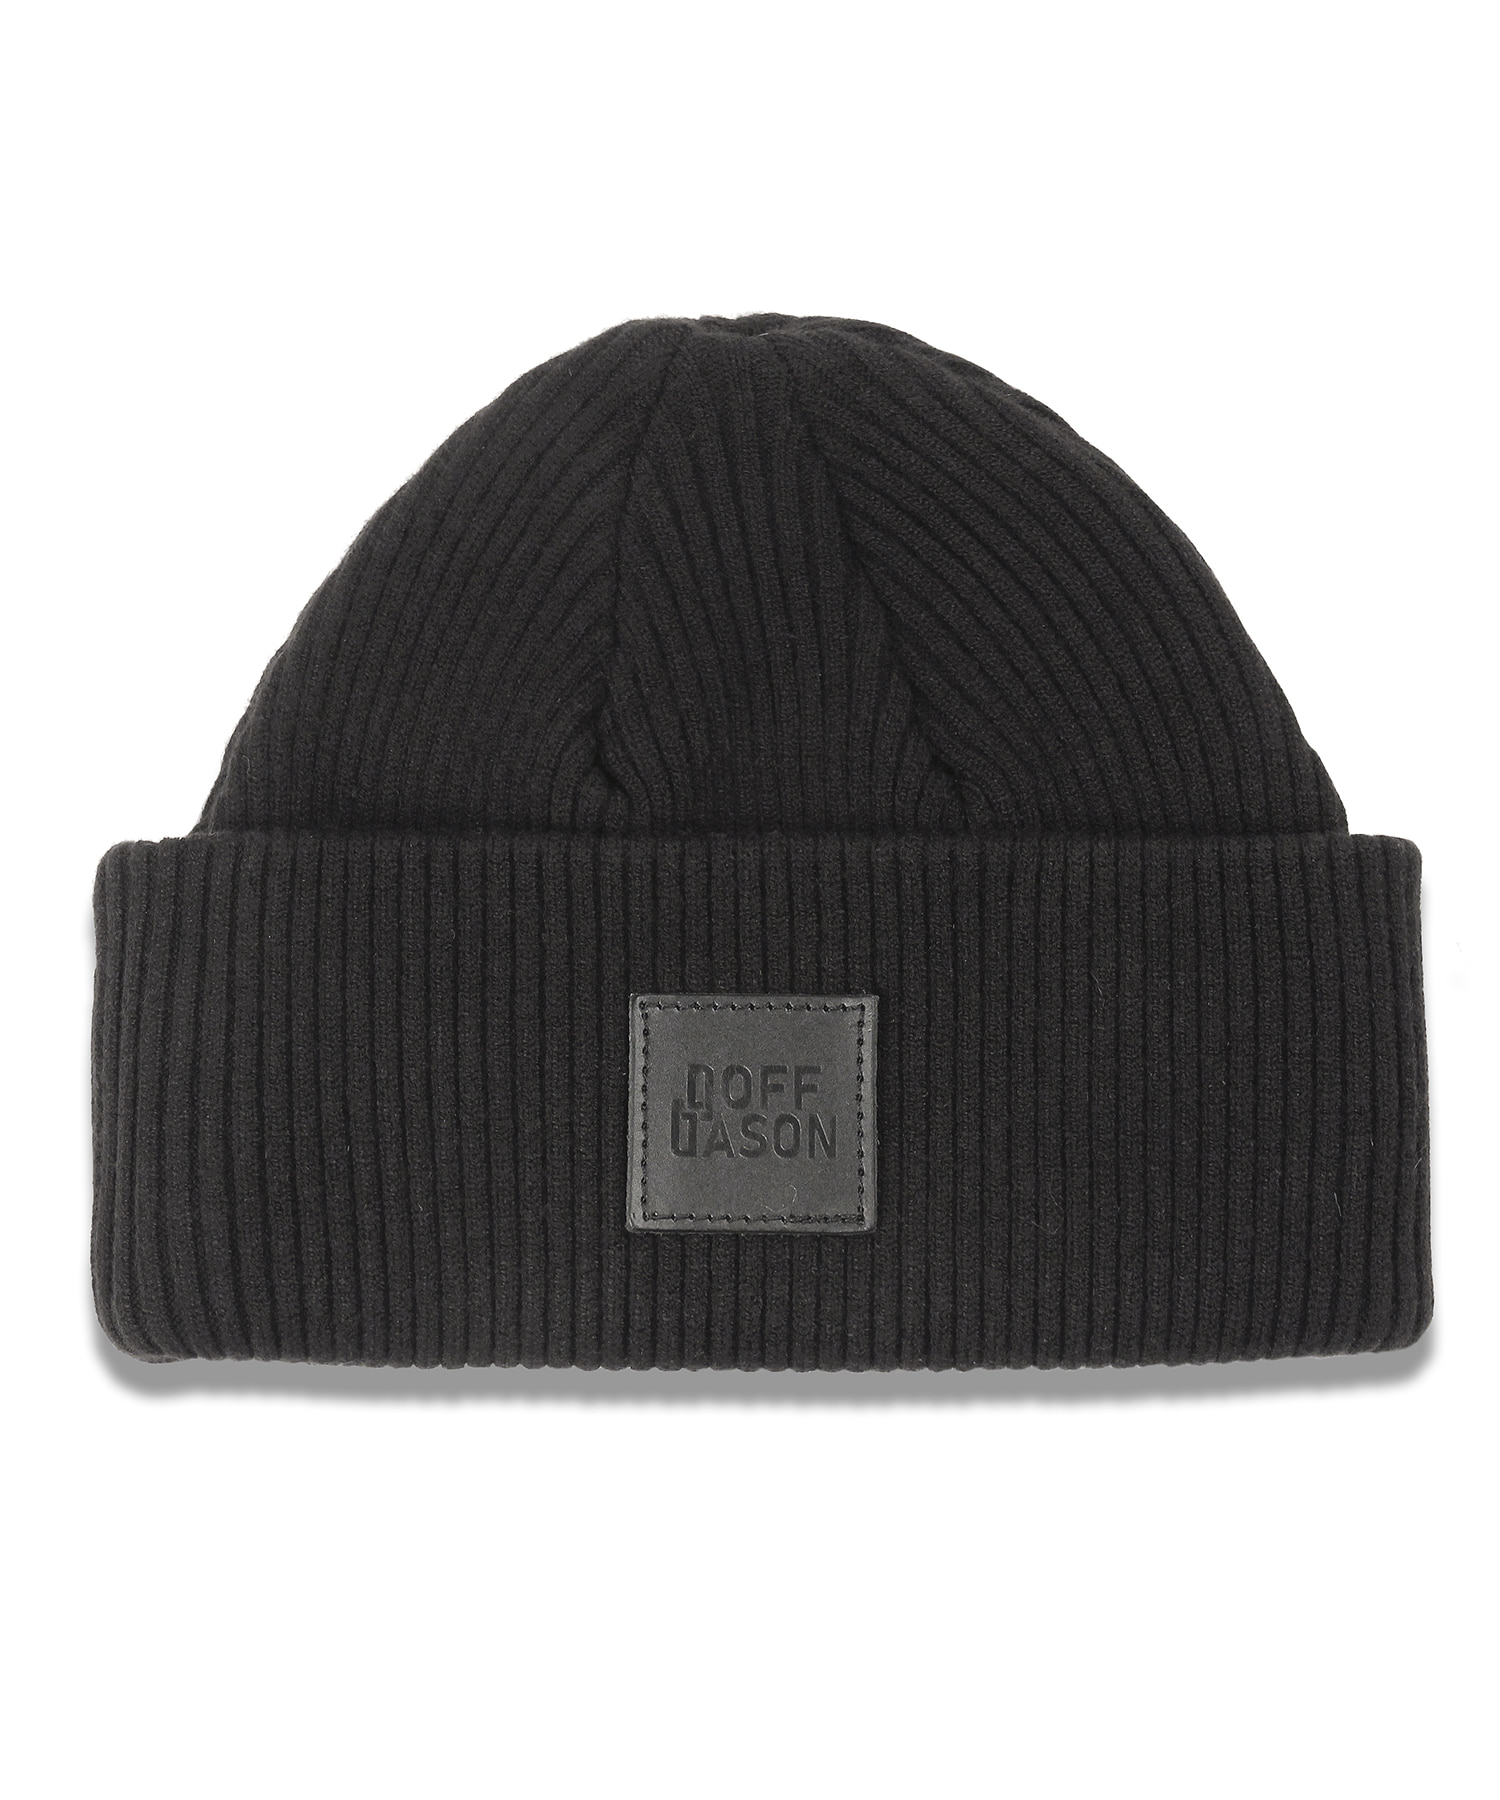 Leather patched beanie